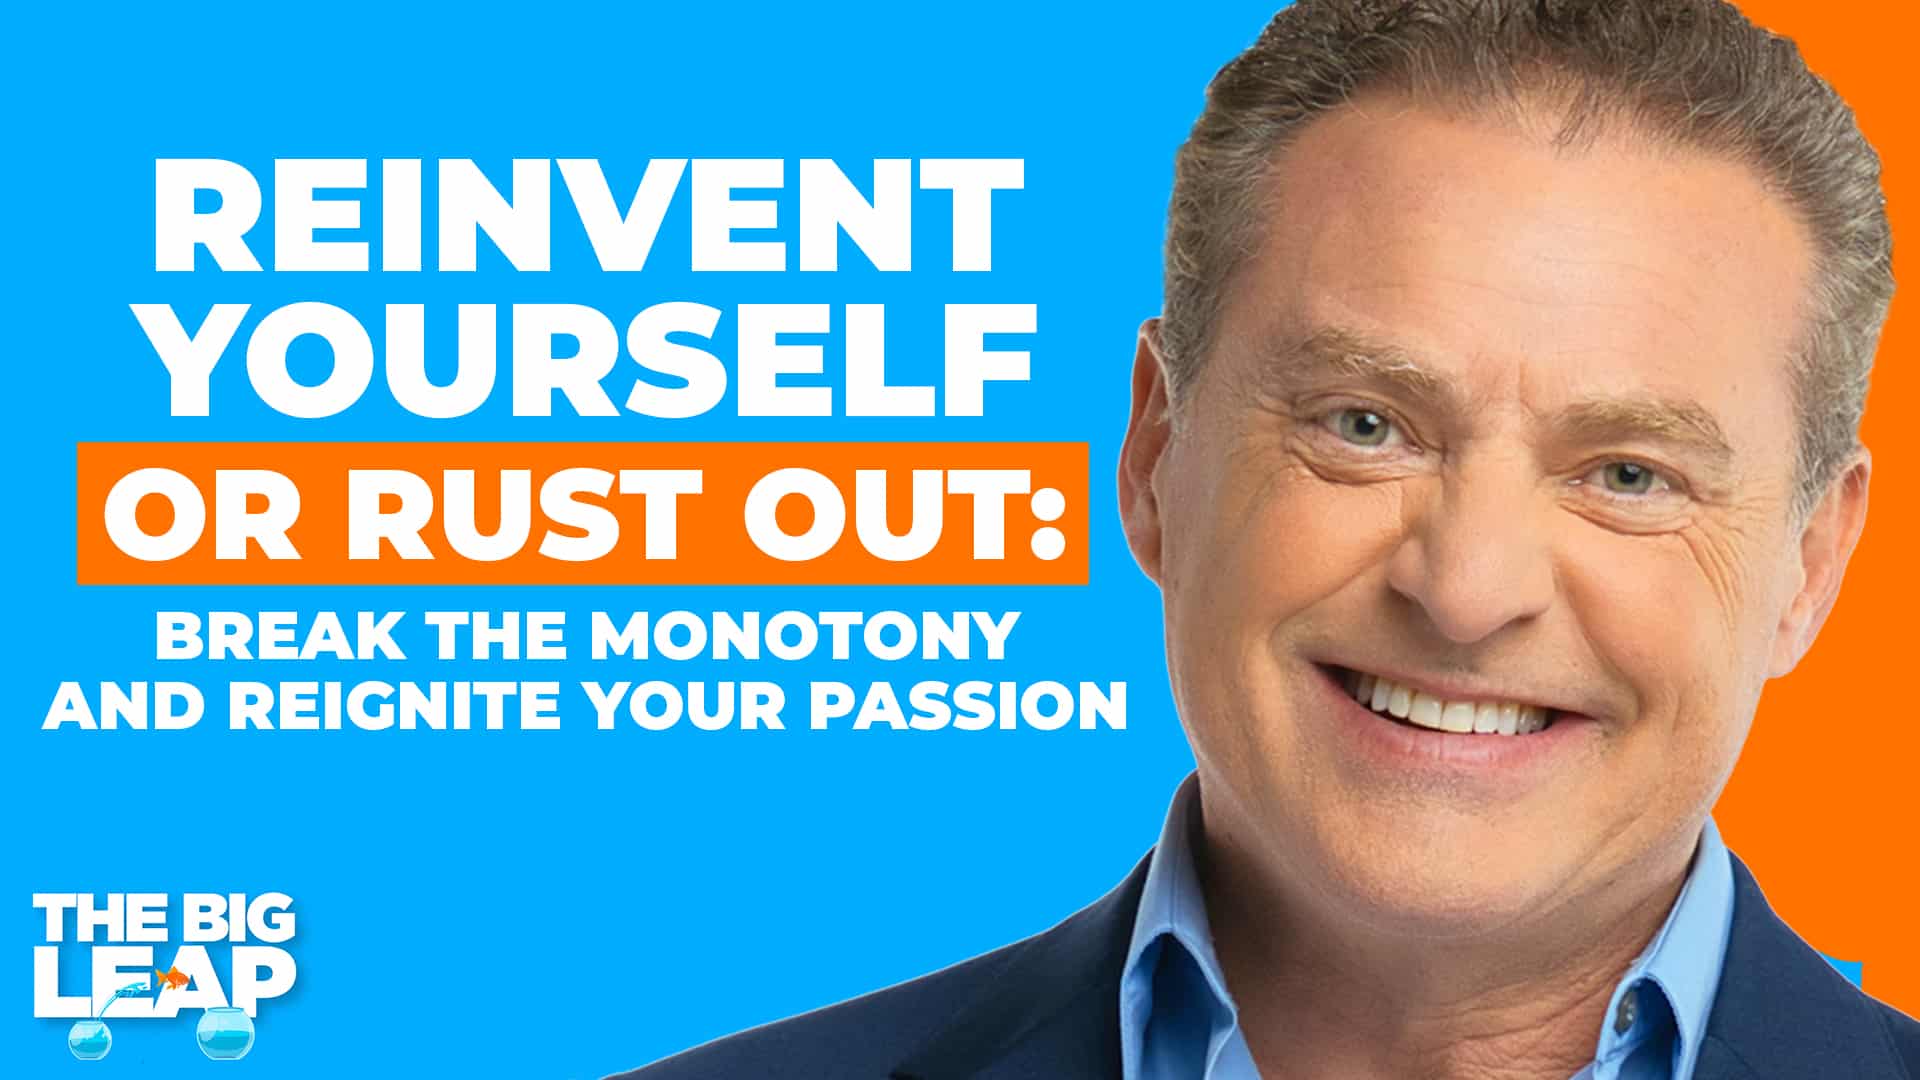 The Big Leap Episode 79 Cover Photo showing a photo of Mike Koenigs and the words "Reinvent Yourself or Rust Out: Break the Monotony and Reignite Your Passion."